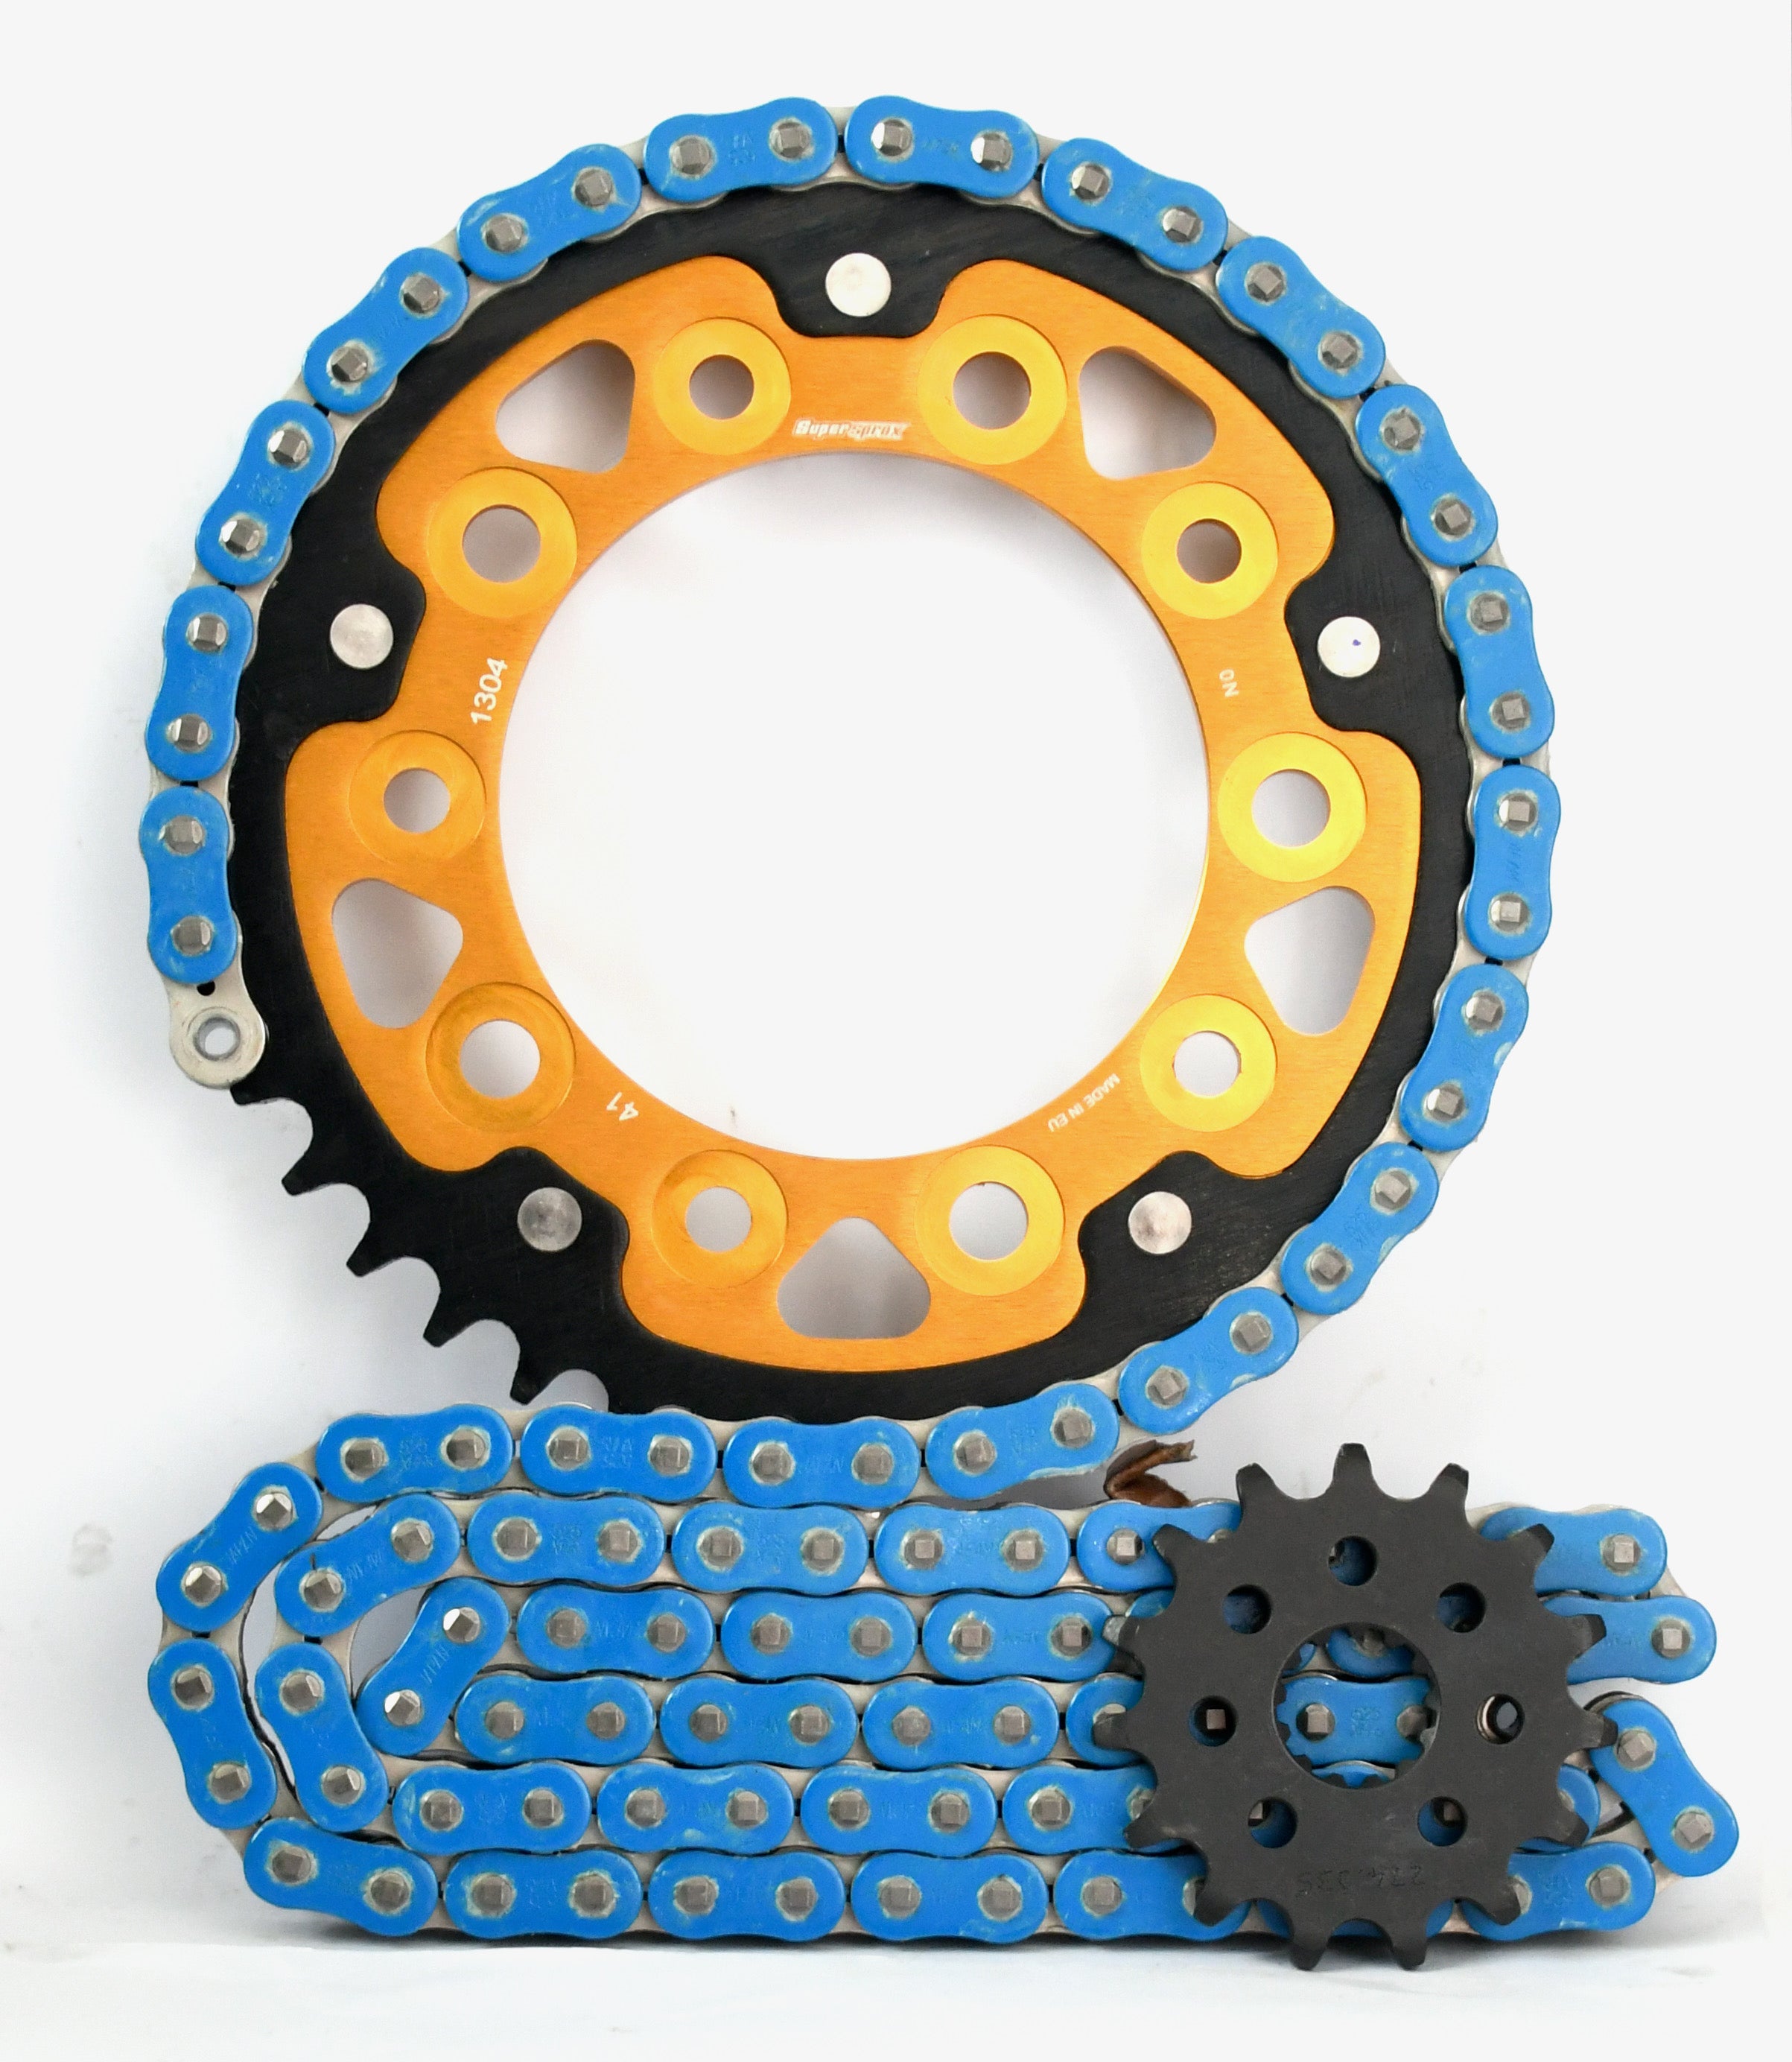 Supersprox Chain & Sprocket Kit for Yamaha YZF R1 2015> - Standard Gearing